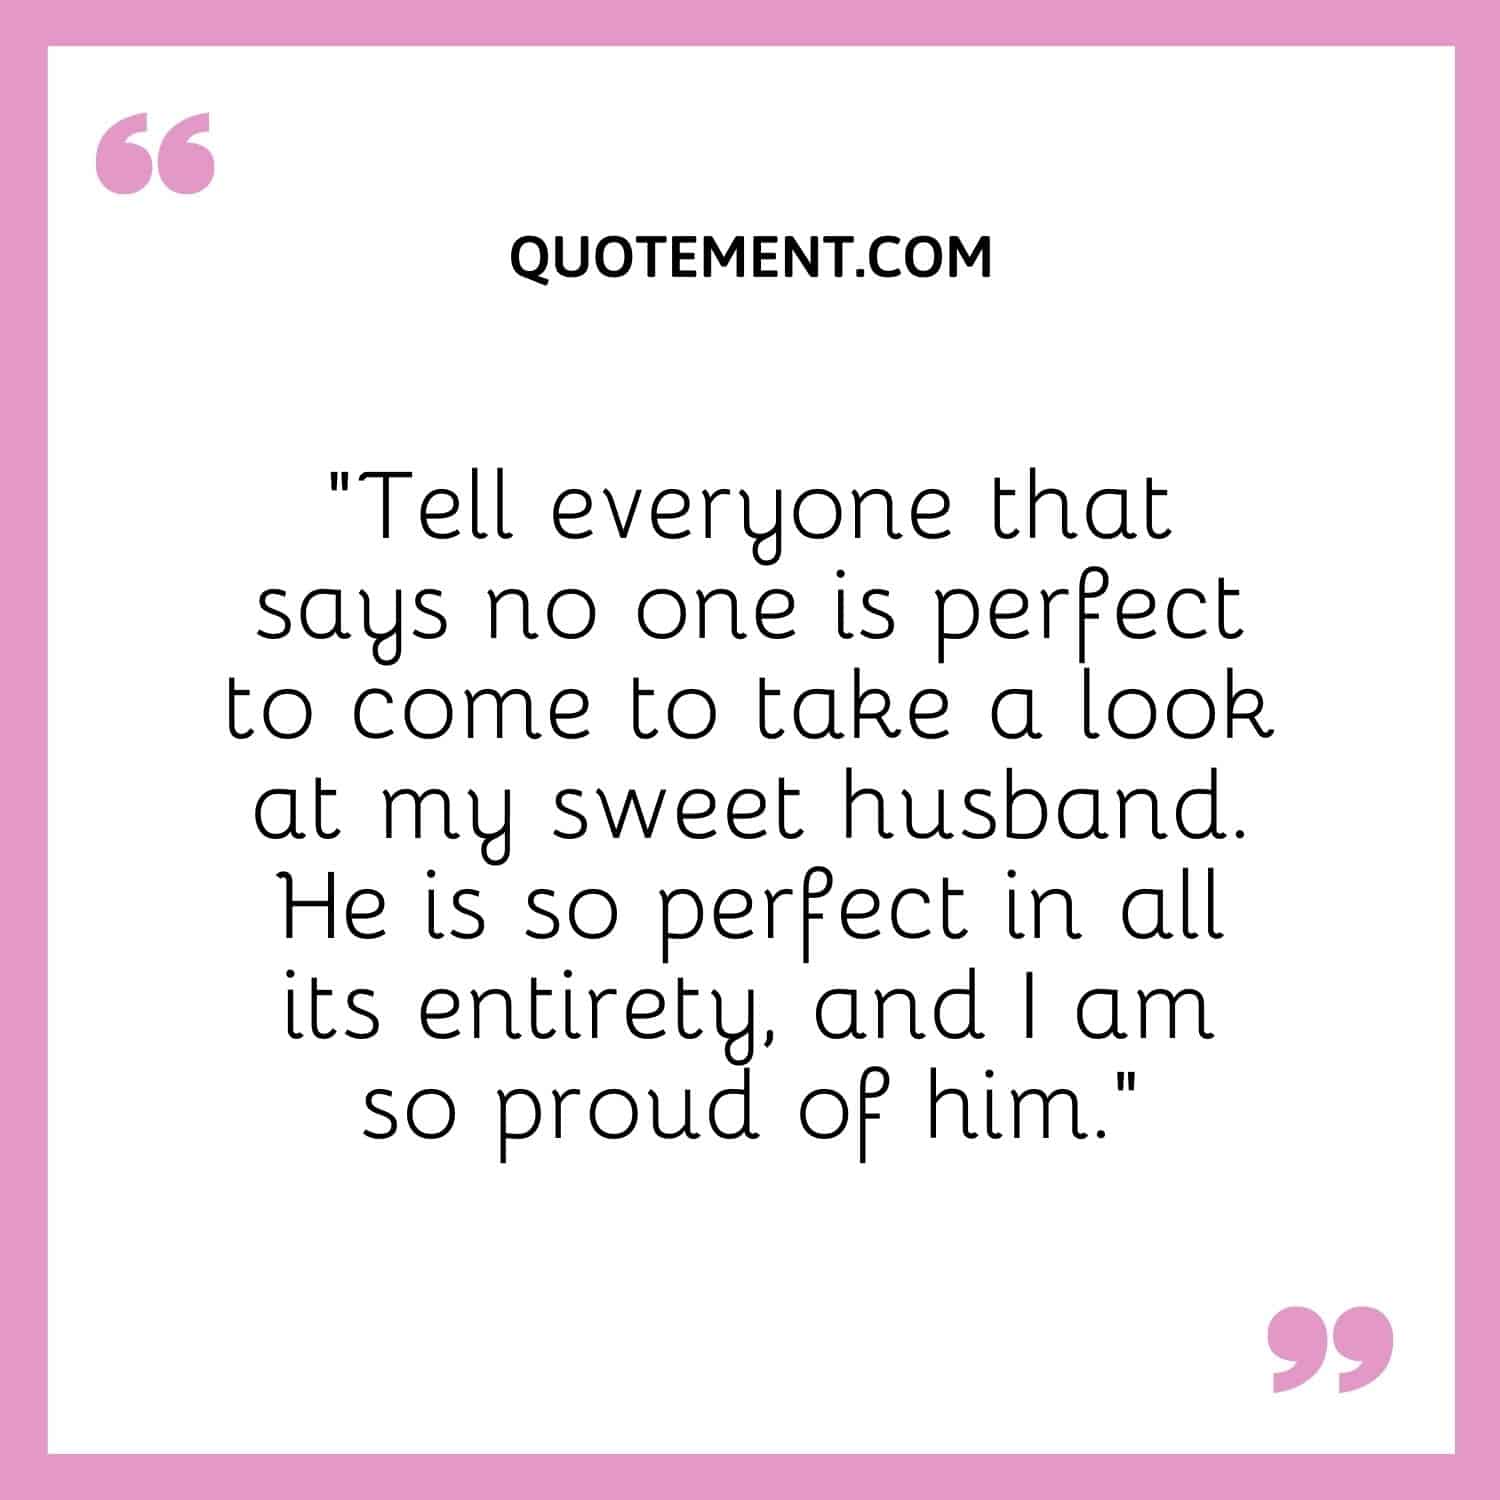 “Tell everyone that says no one is perfect to come to take a look at my sweet husband. He is so perfect in all its entirety, and I am so proud of him.”